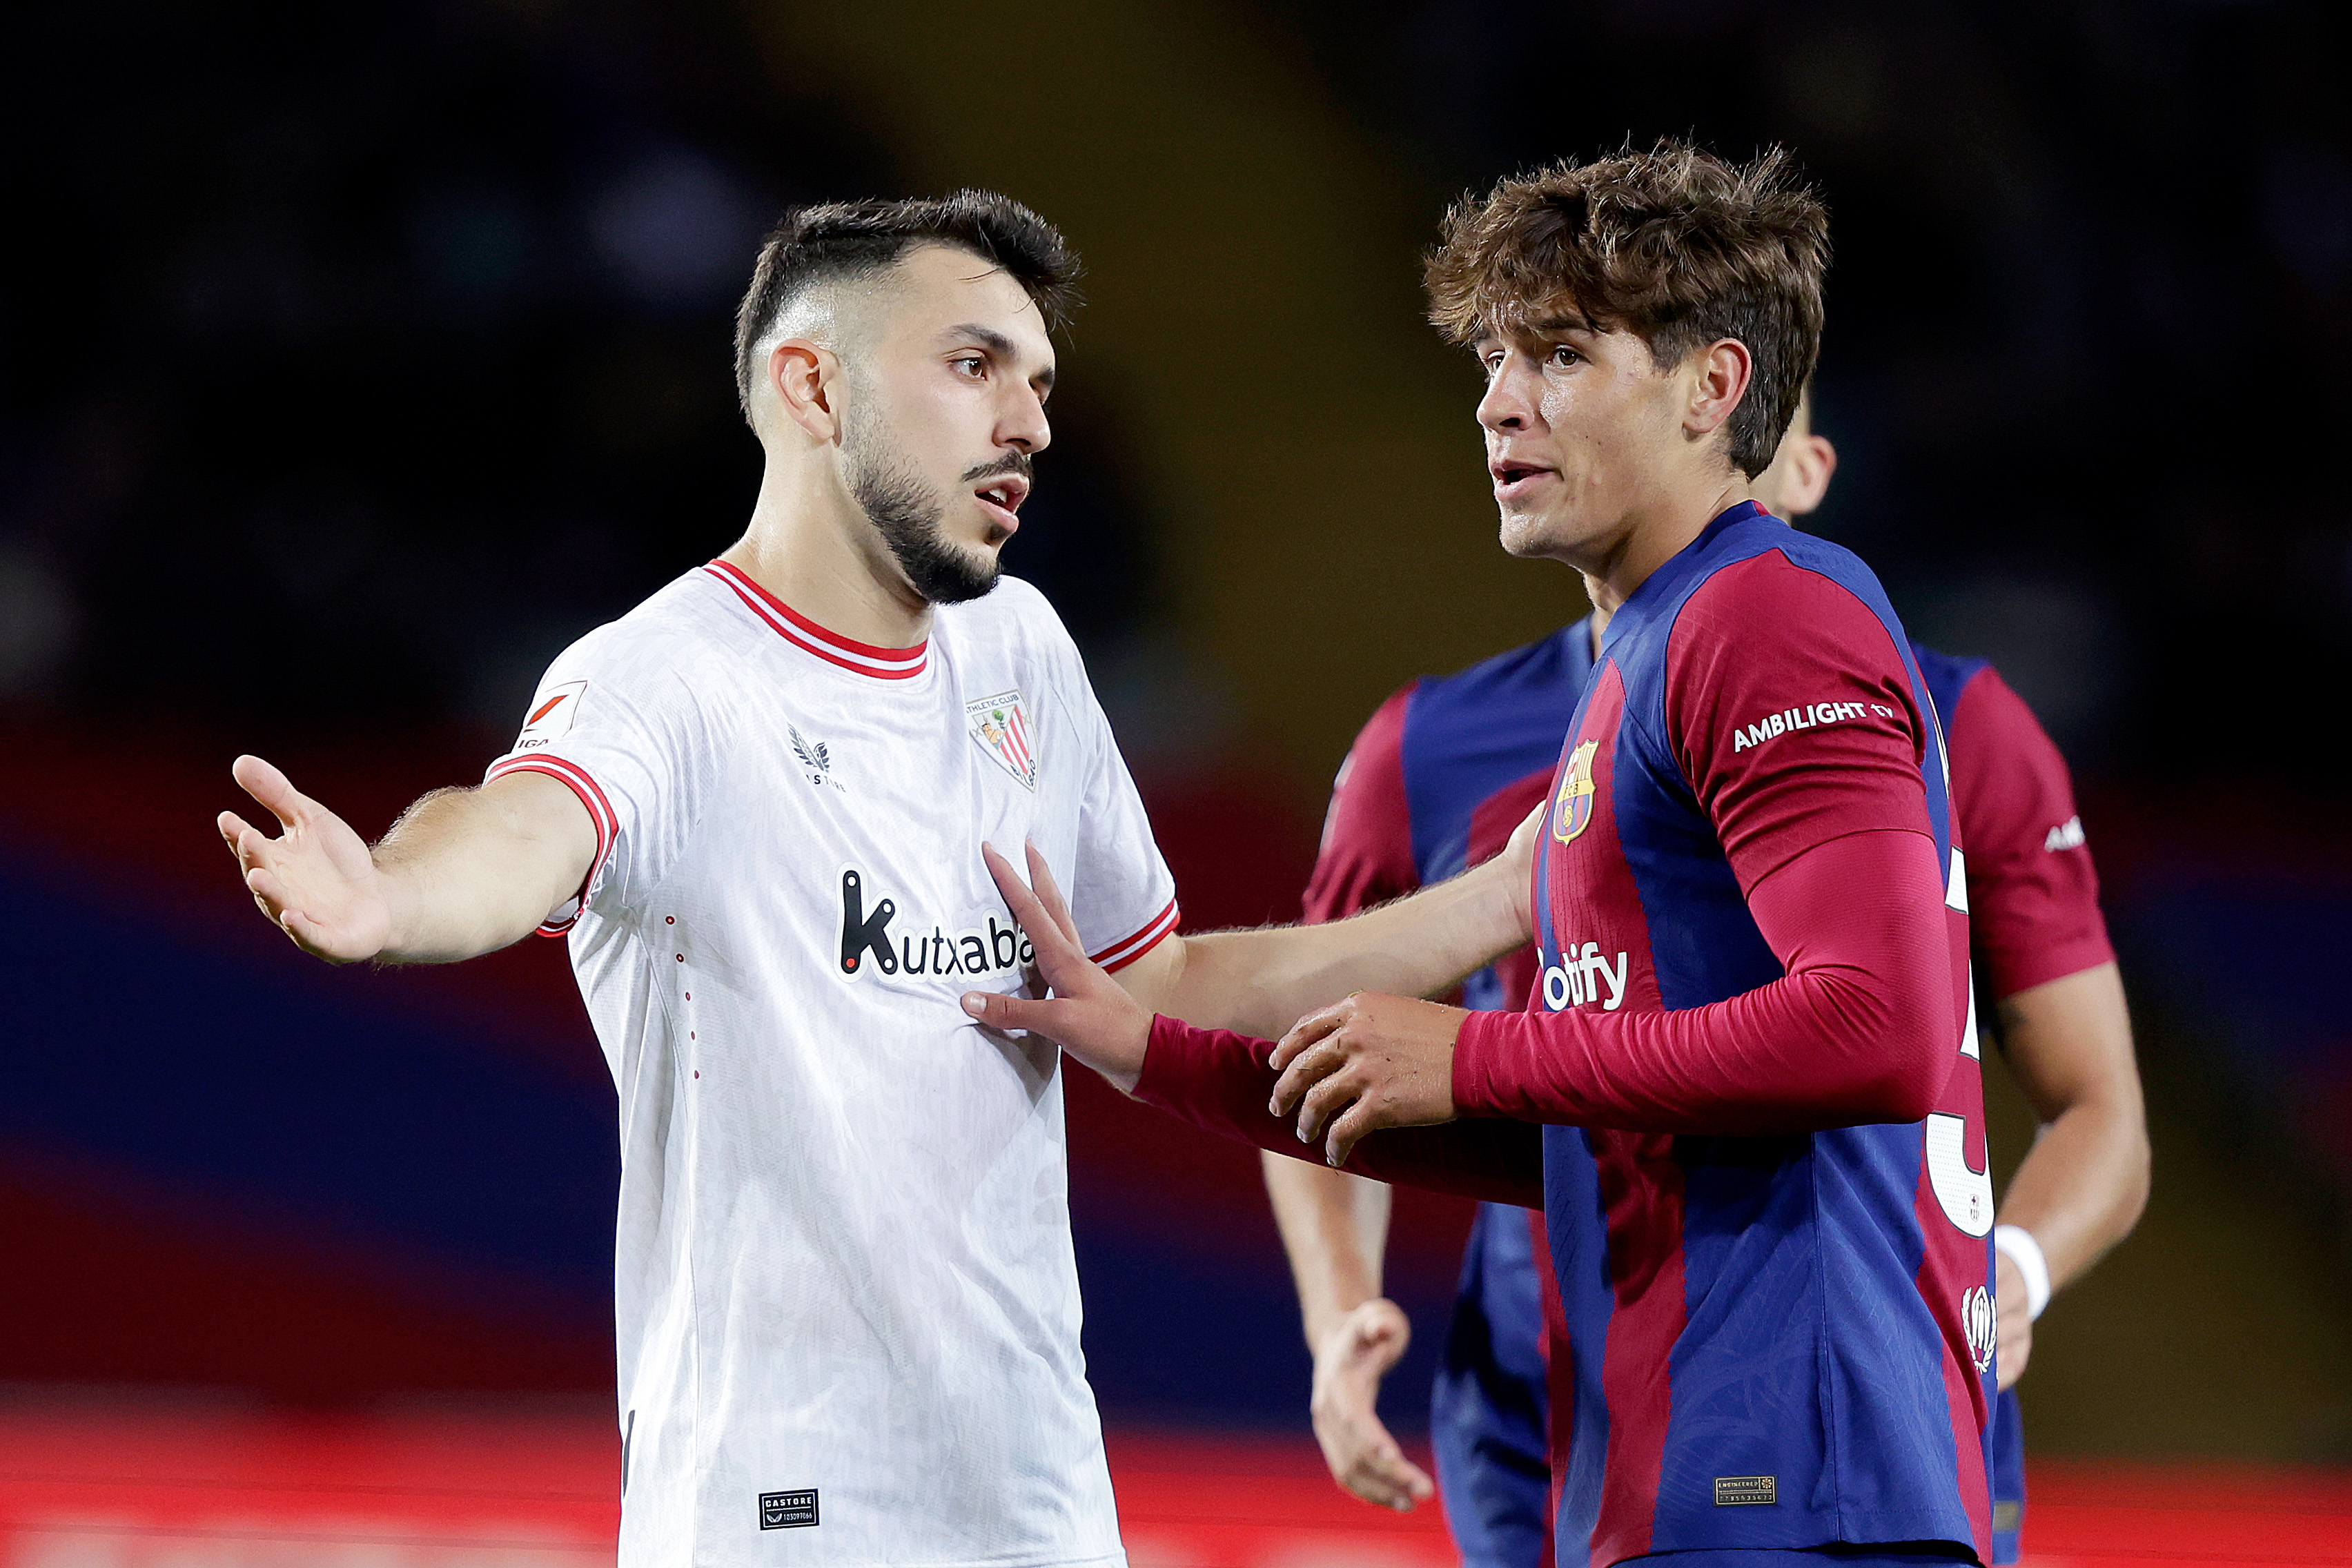 Barcelona teenager Marc Guiu scores winning goal 30 seconds into debut  against Athletic Club